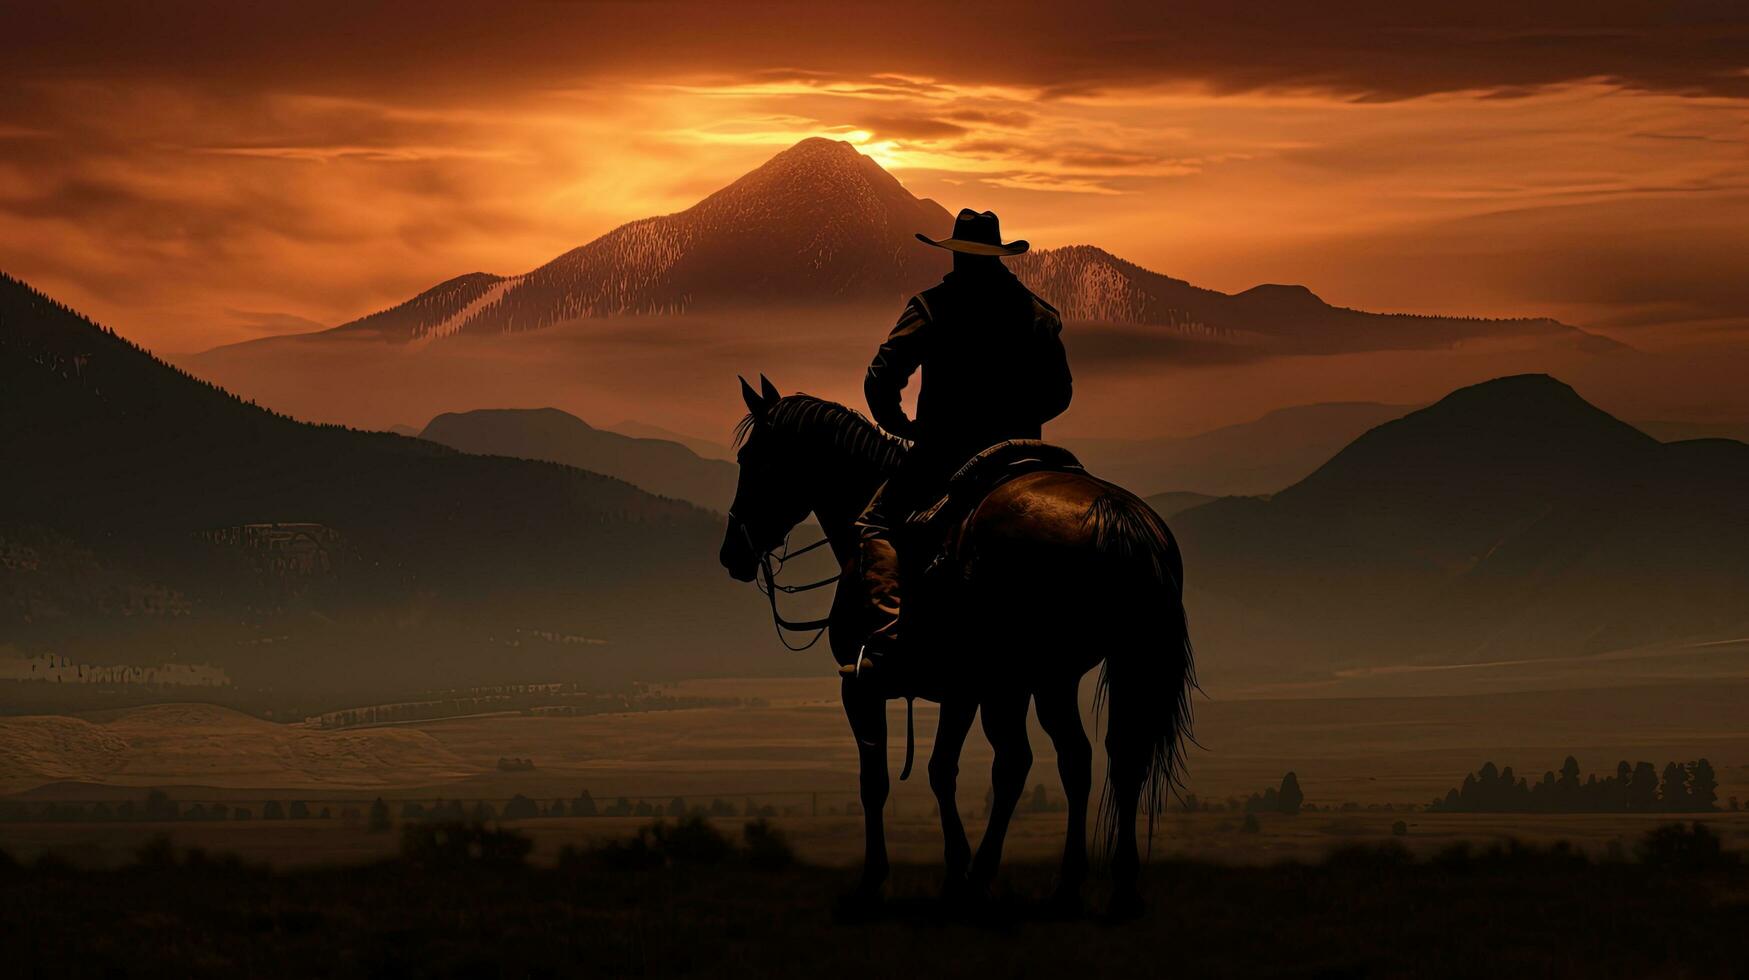 Cowboy on horseback before the Bridger Mountains in Montana at sunrise. silhouette concept photo